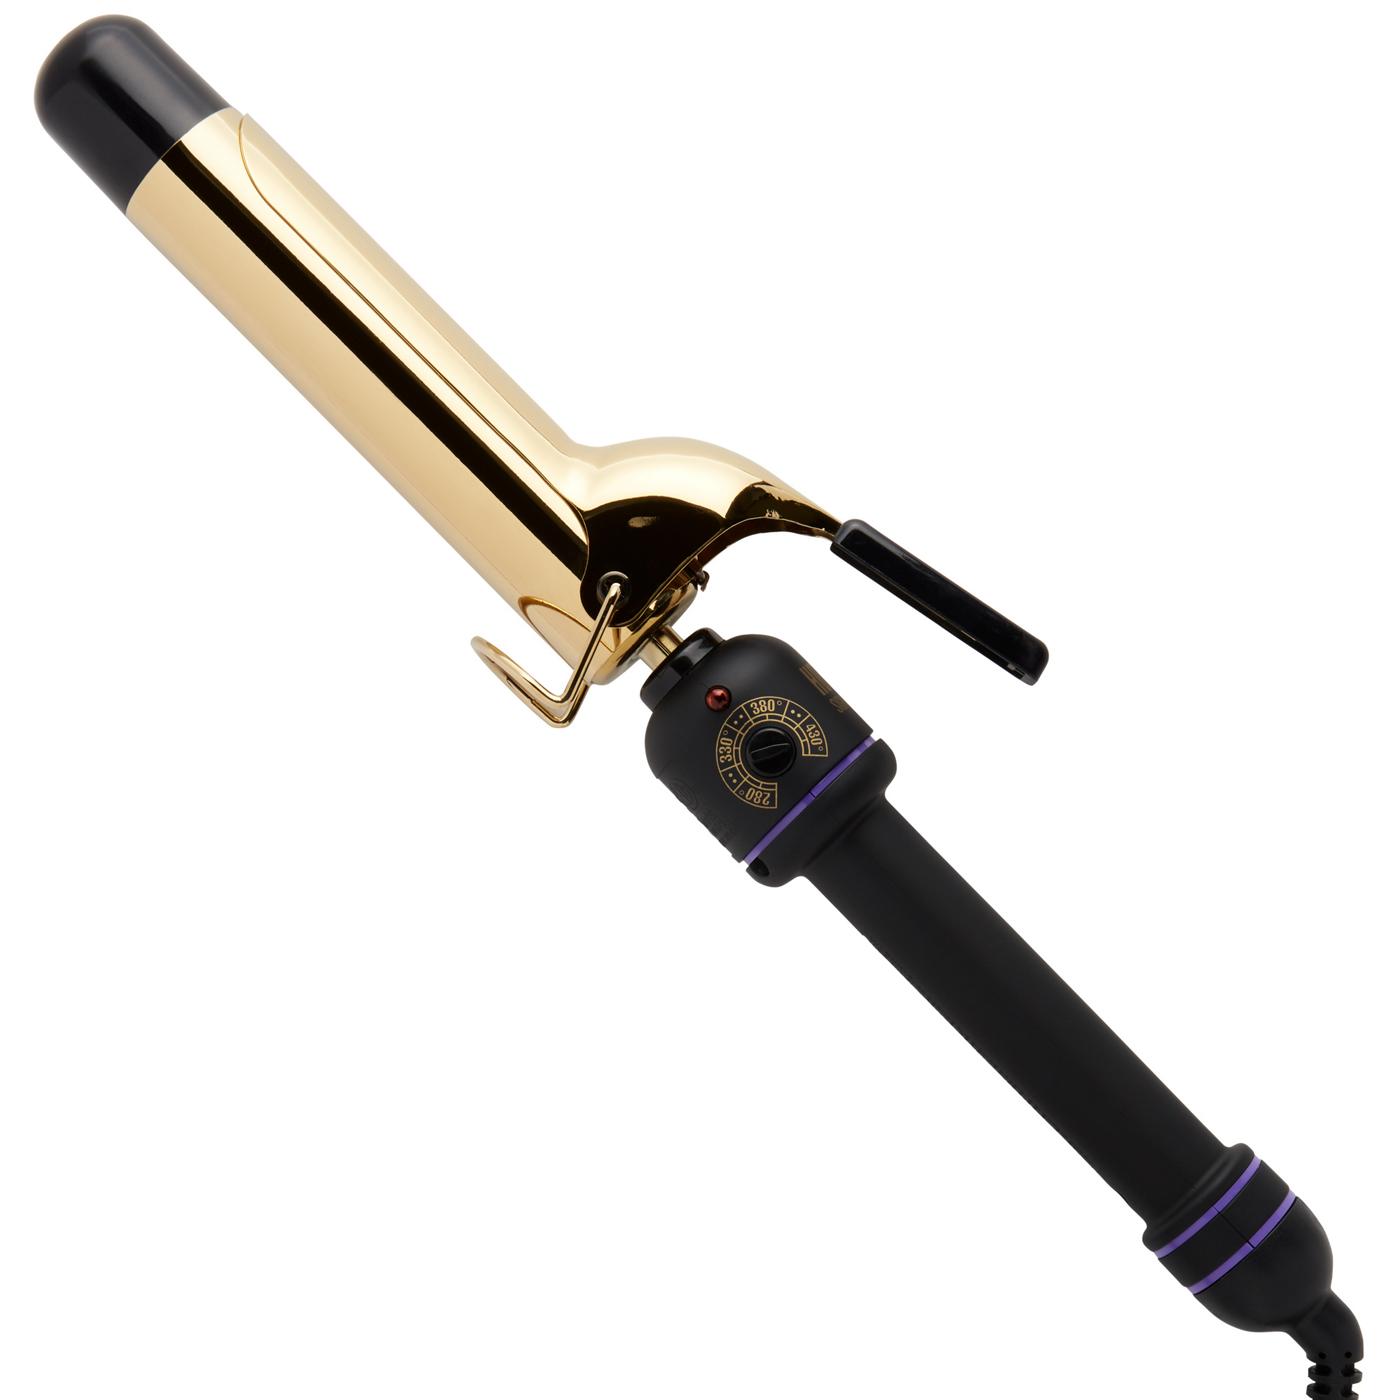 Hot Tools Pro Signature 24K Gold Curling Iron/Wand 1-1/4 in; image 1 of 6